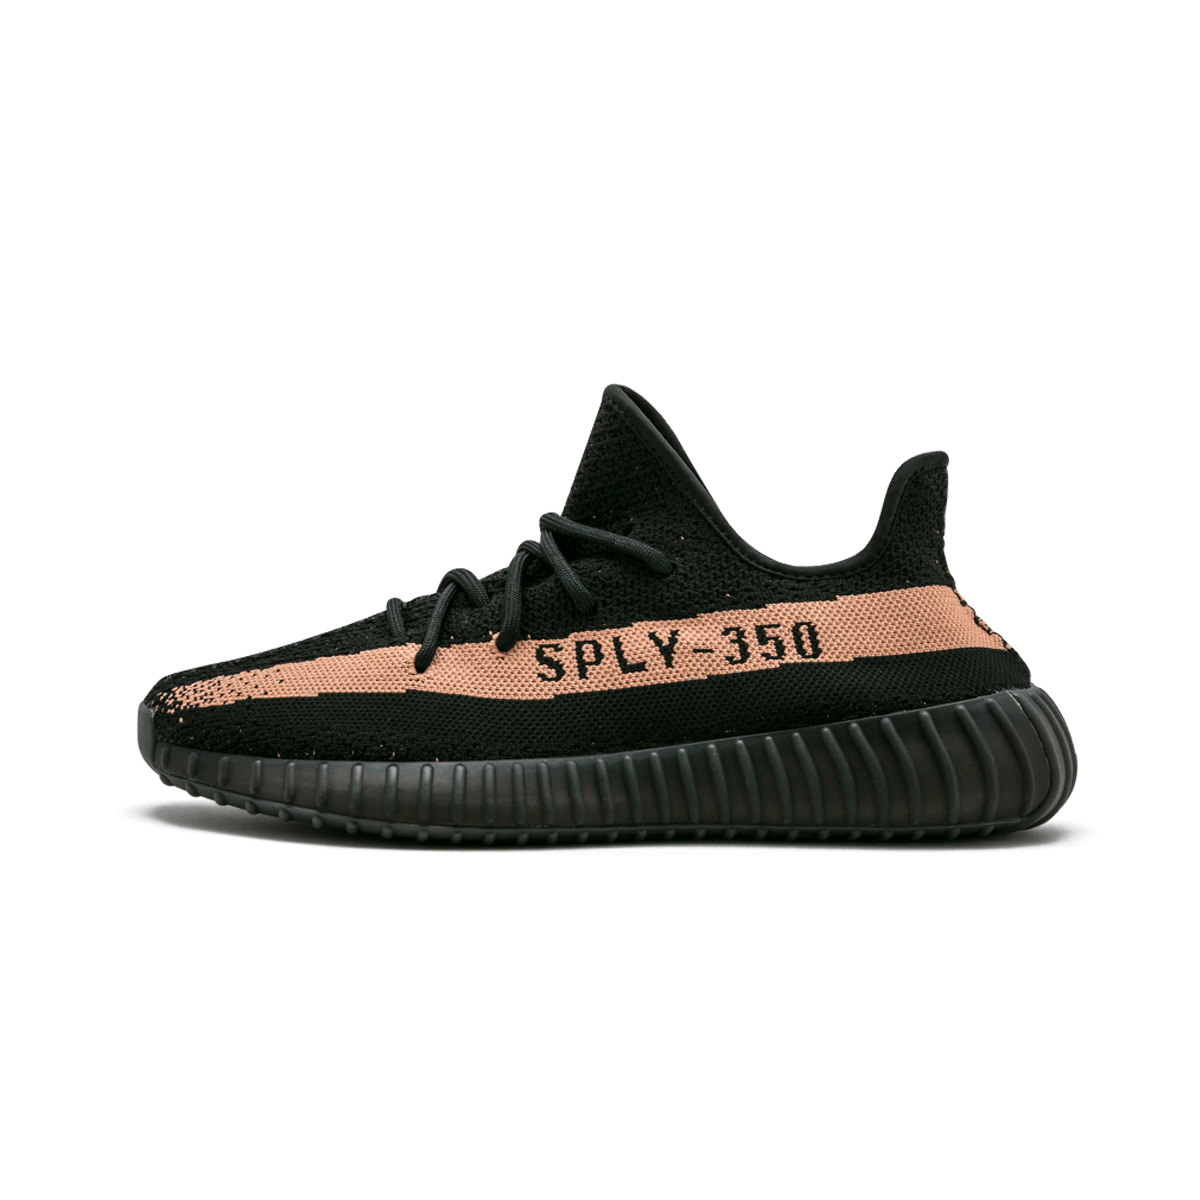 yeezy boost 350 v2 core